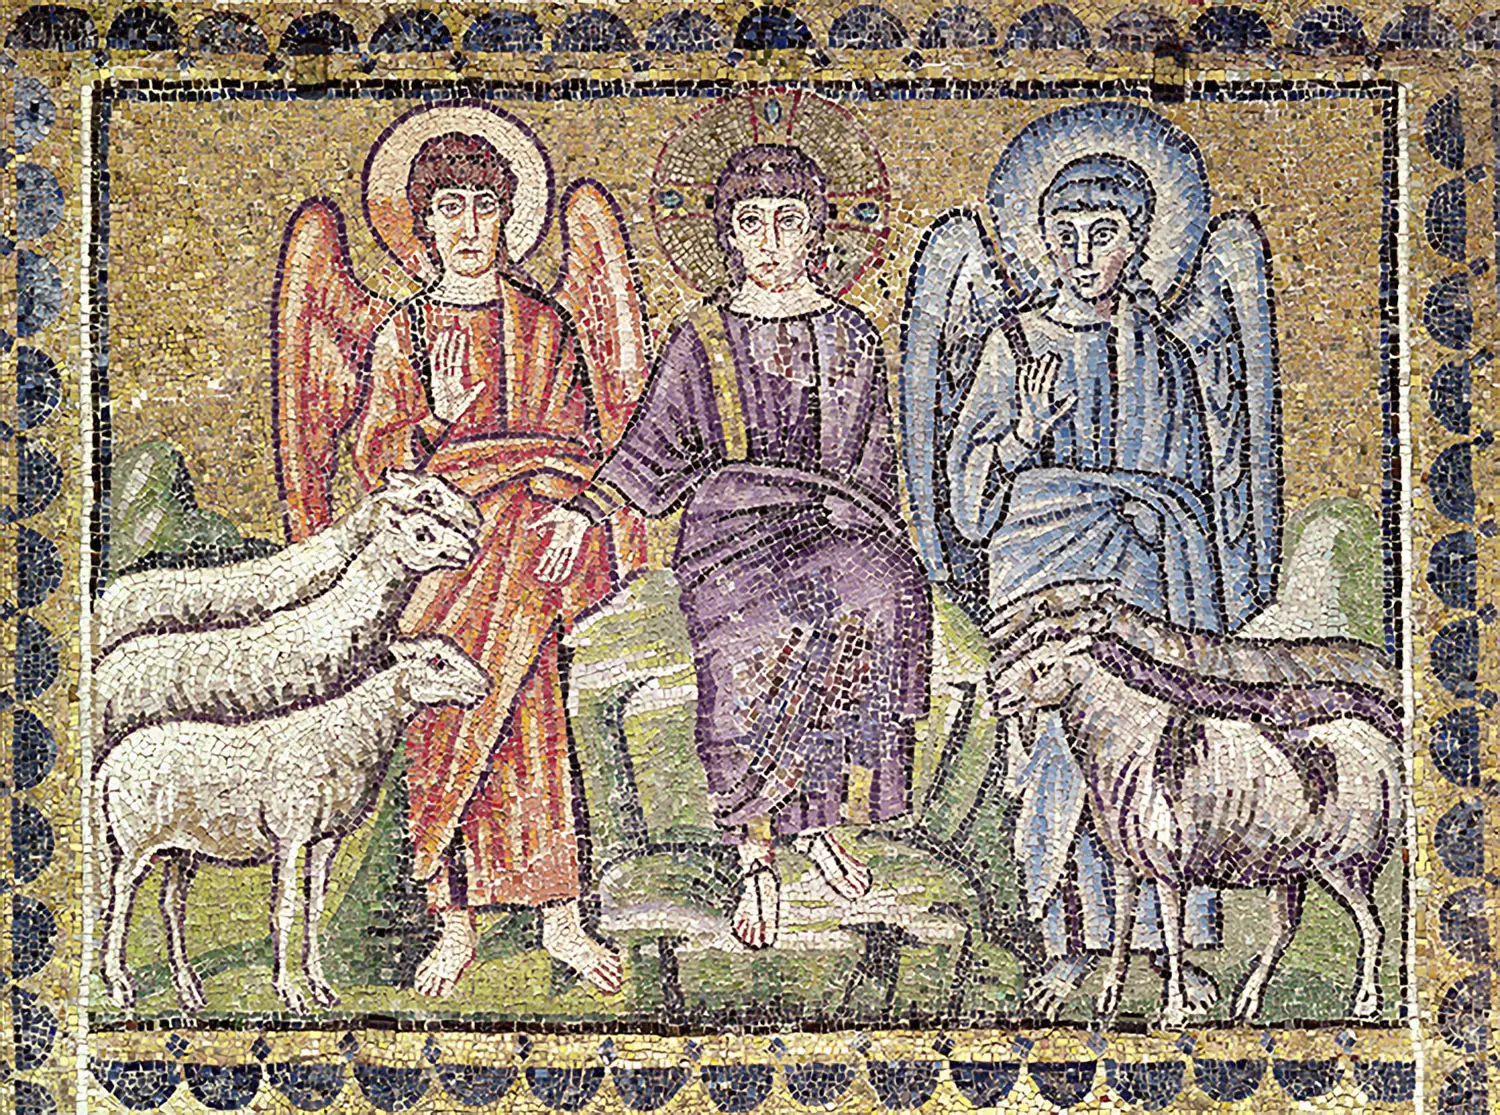 Christ, with angels to his left and right, is setting the sheep to the right of his hand and the goats to the left.